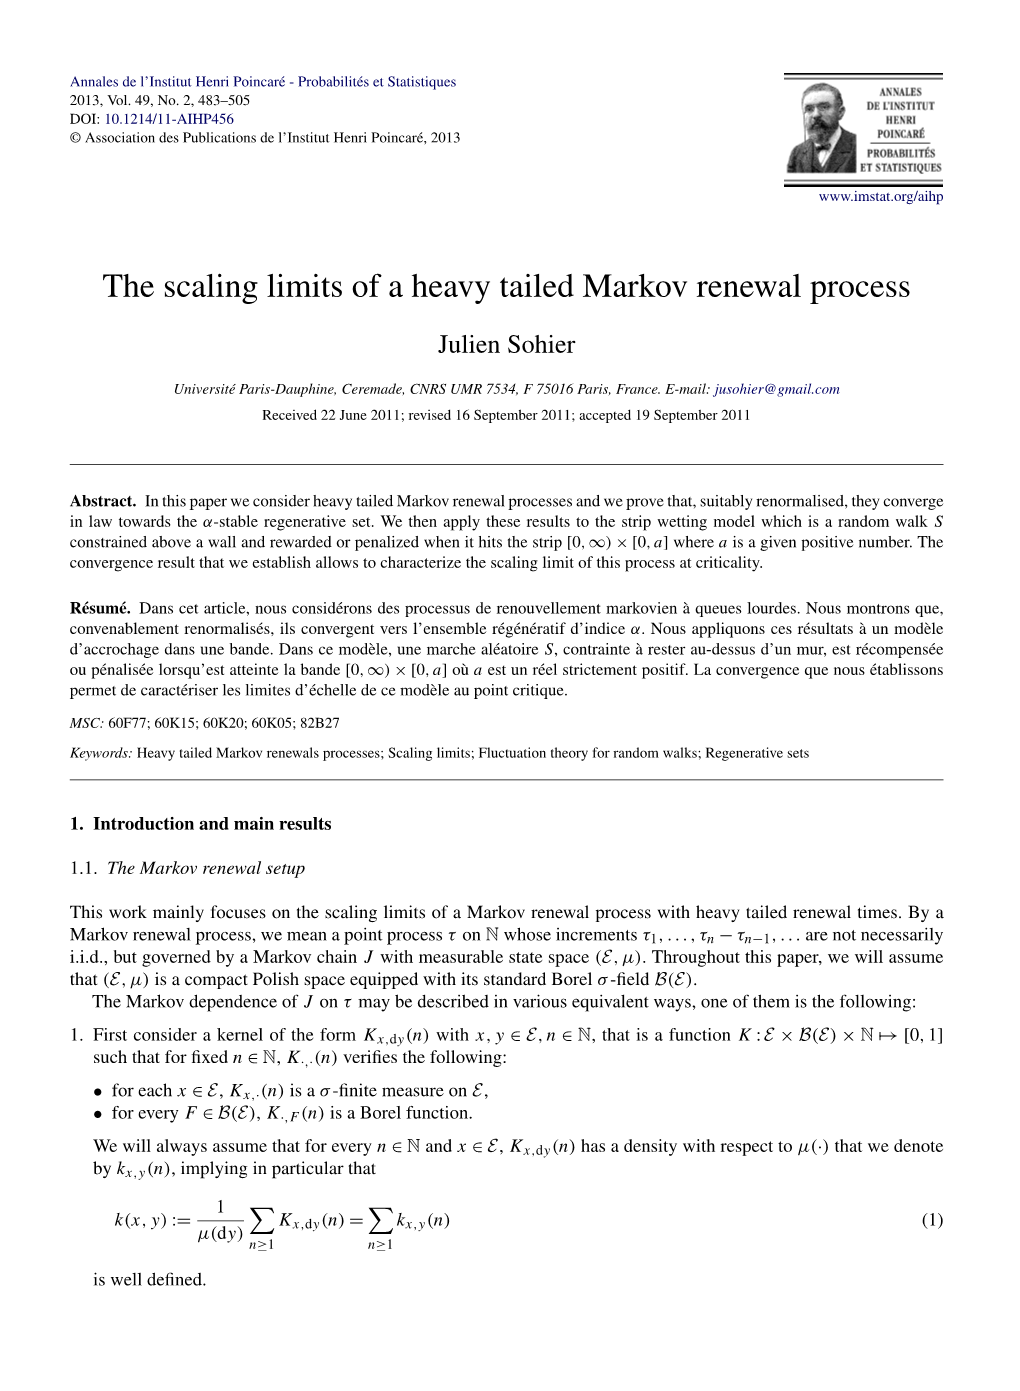 The Scaling Limits of a Heavy Tailed Markov Renewal Process